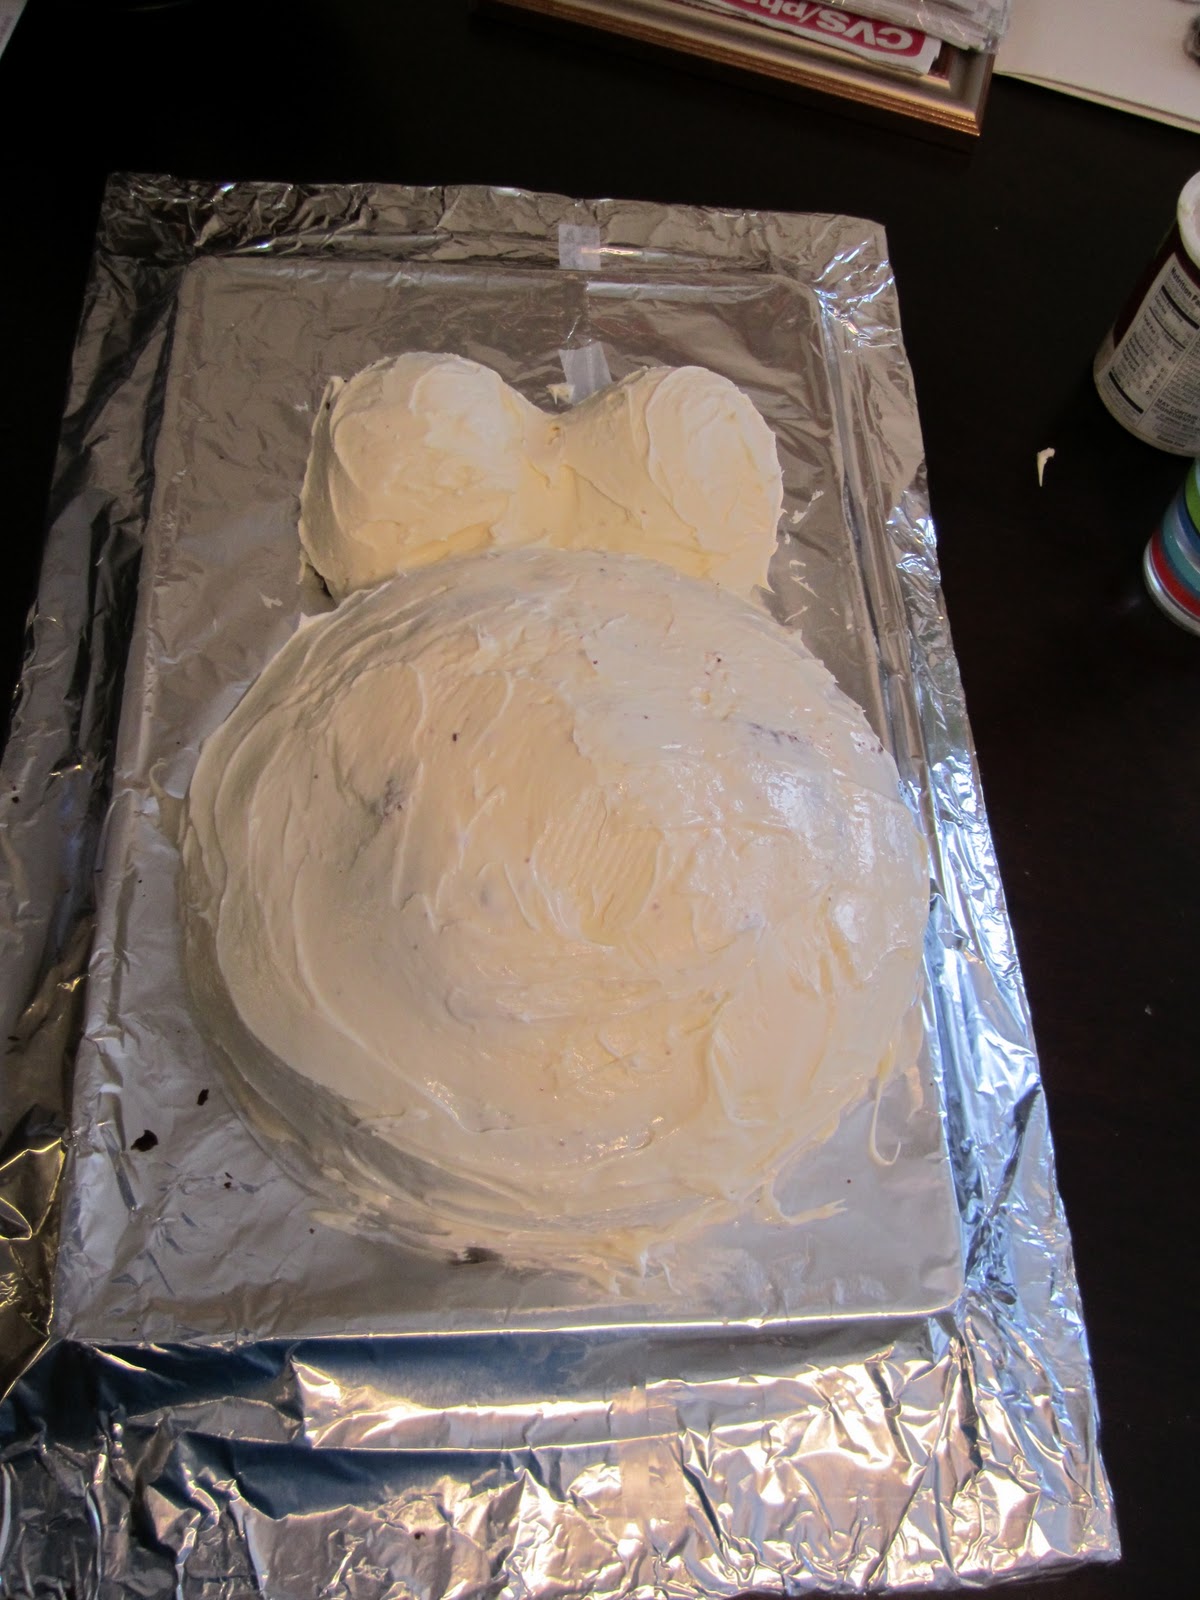 Our Growing Family: Baby Bump Cake!